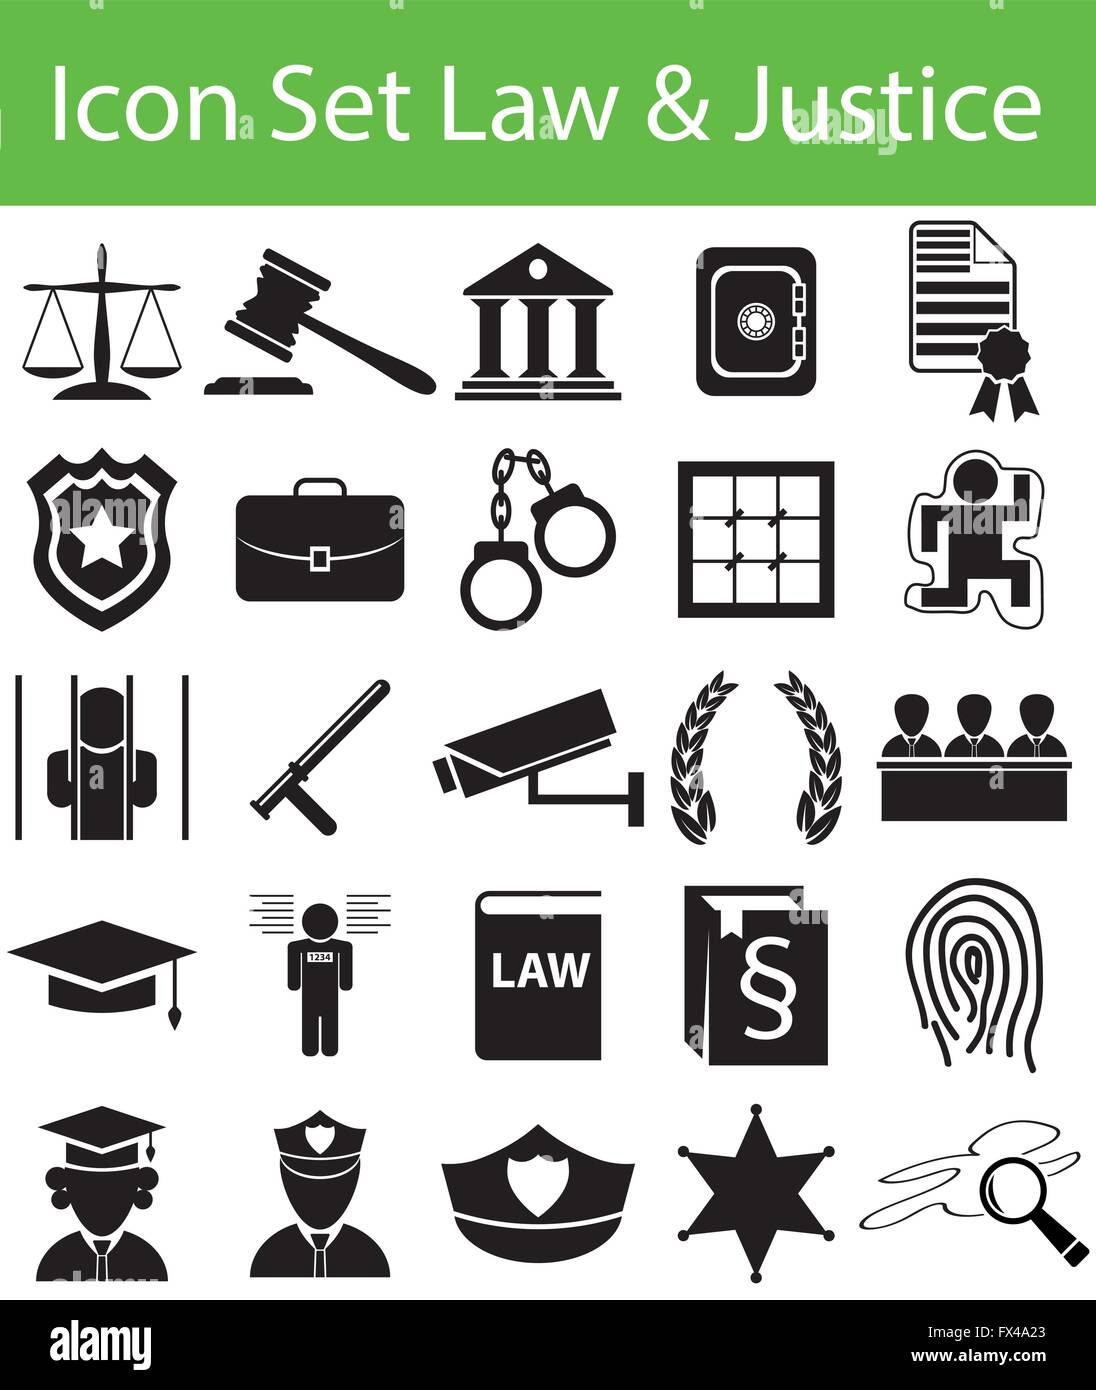 Icon Set Law and Justice with 25 icons for the creative use in graphic design Stock Vector